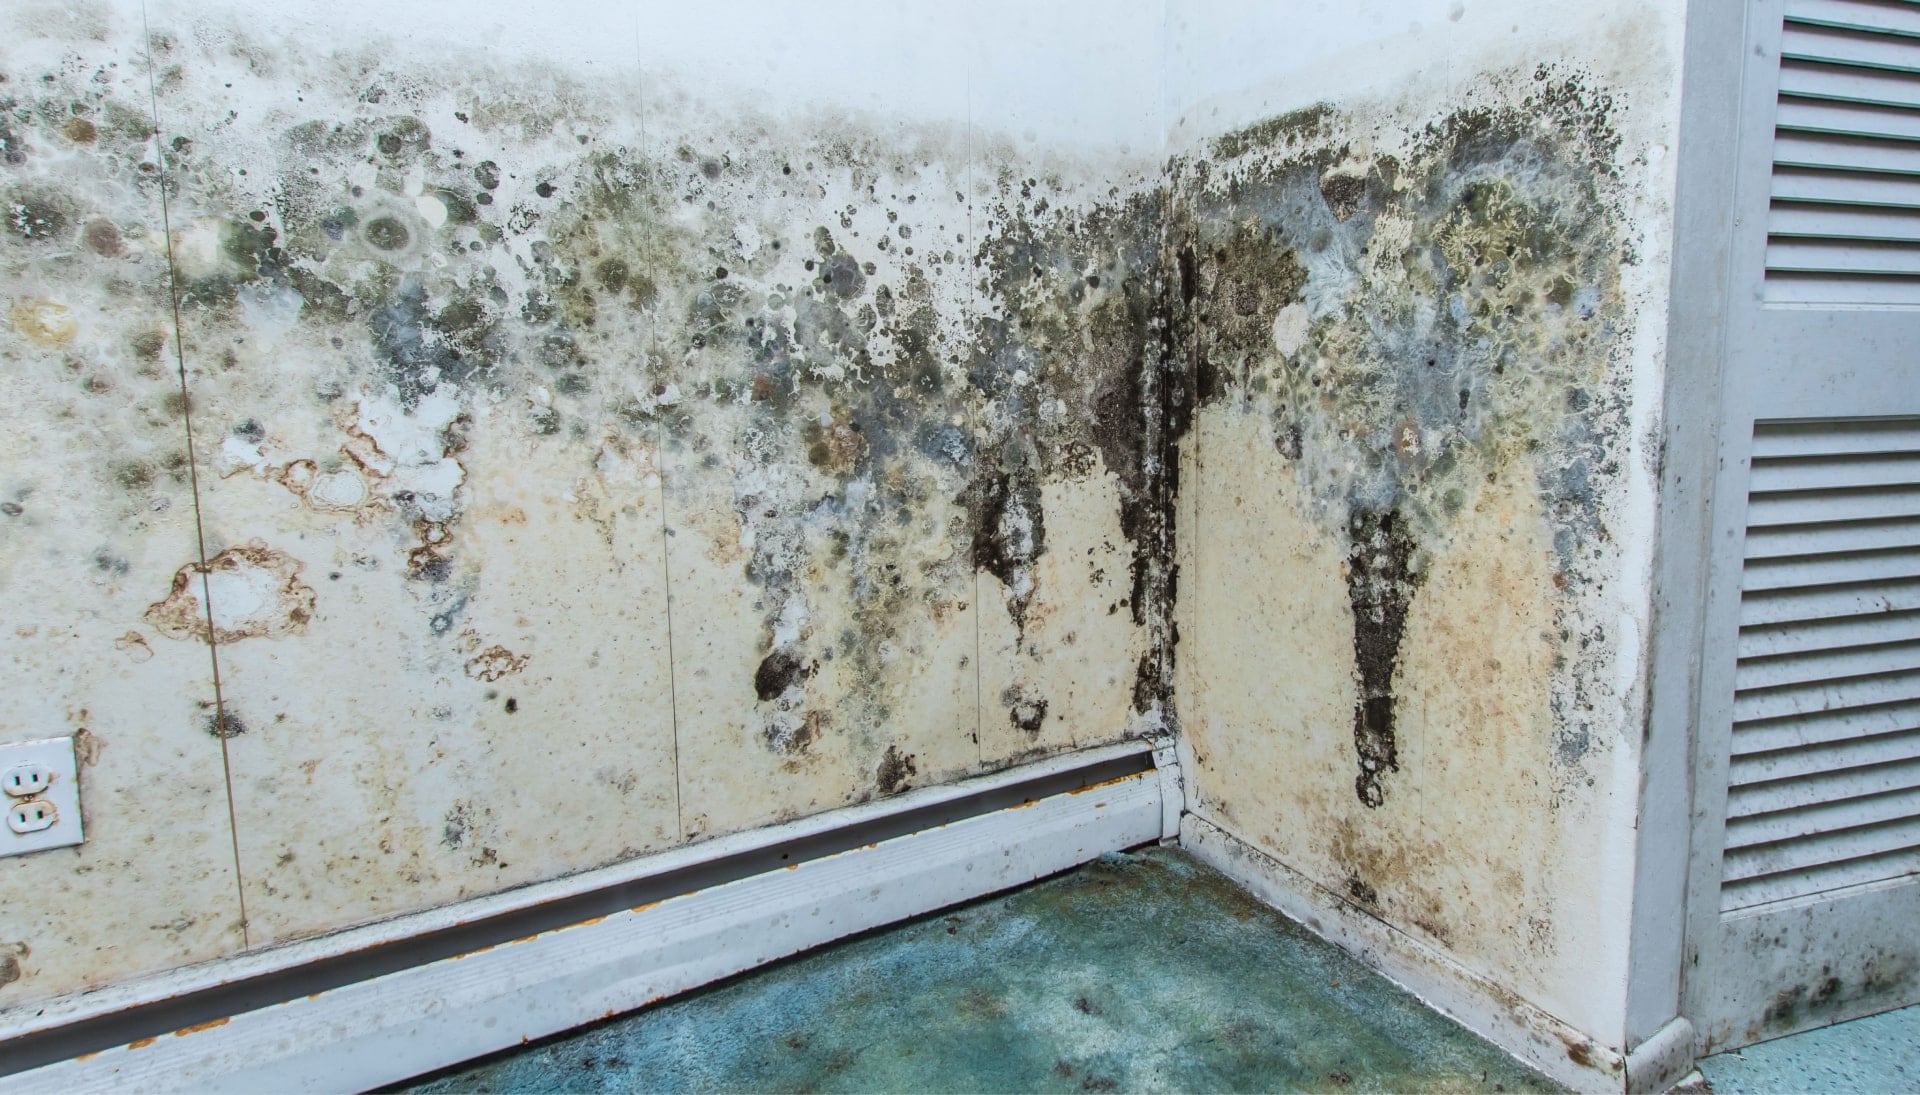 Professional mold removal, odor control, and water damage restoration service in Indianapolis, Indiana.